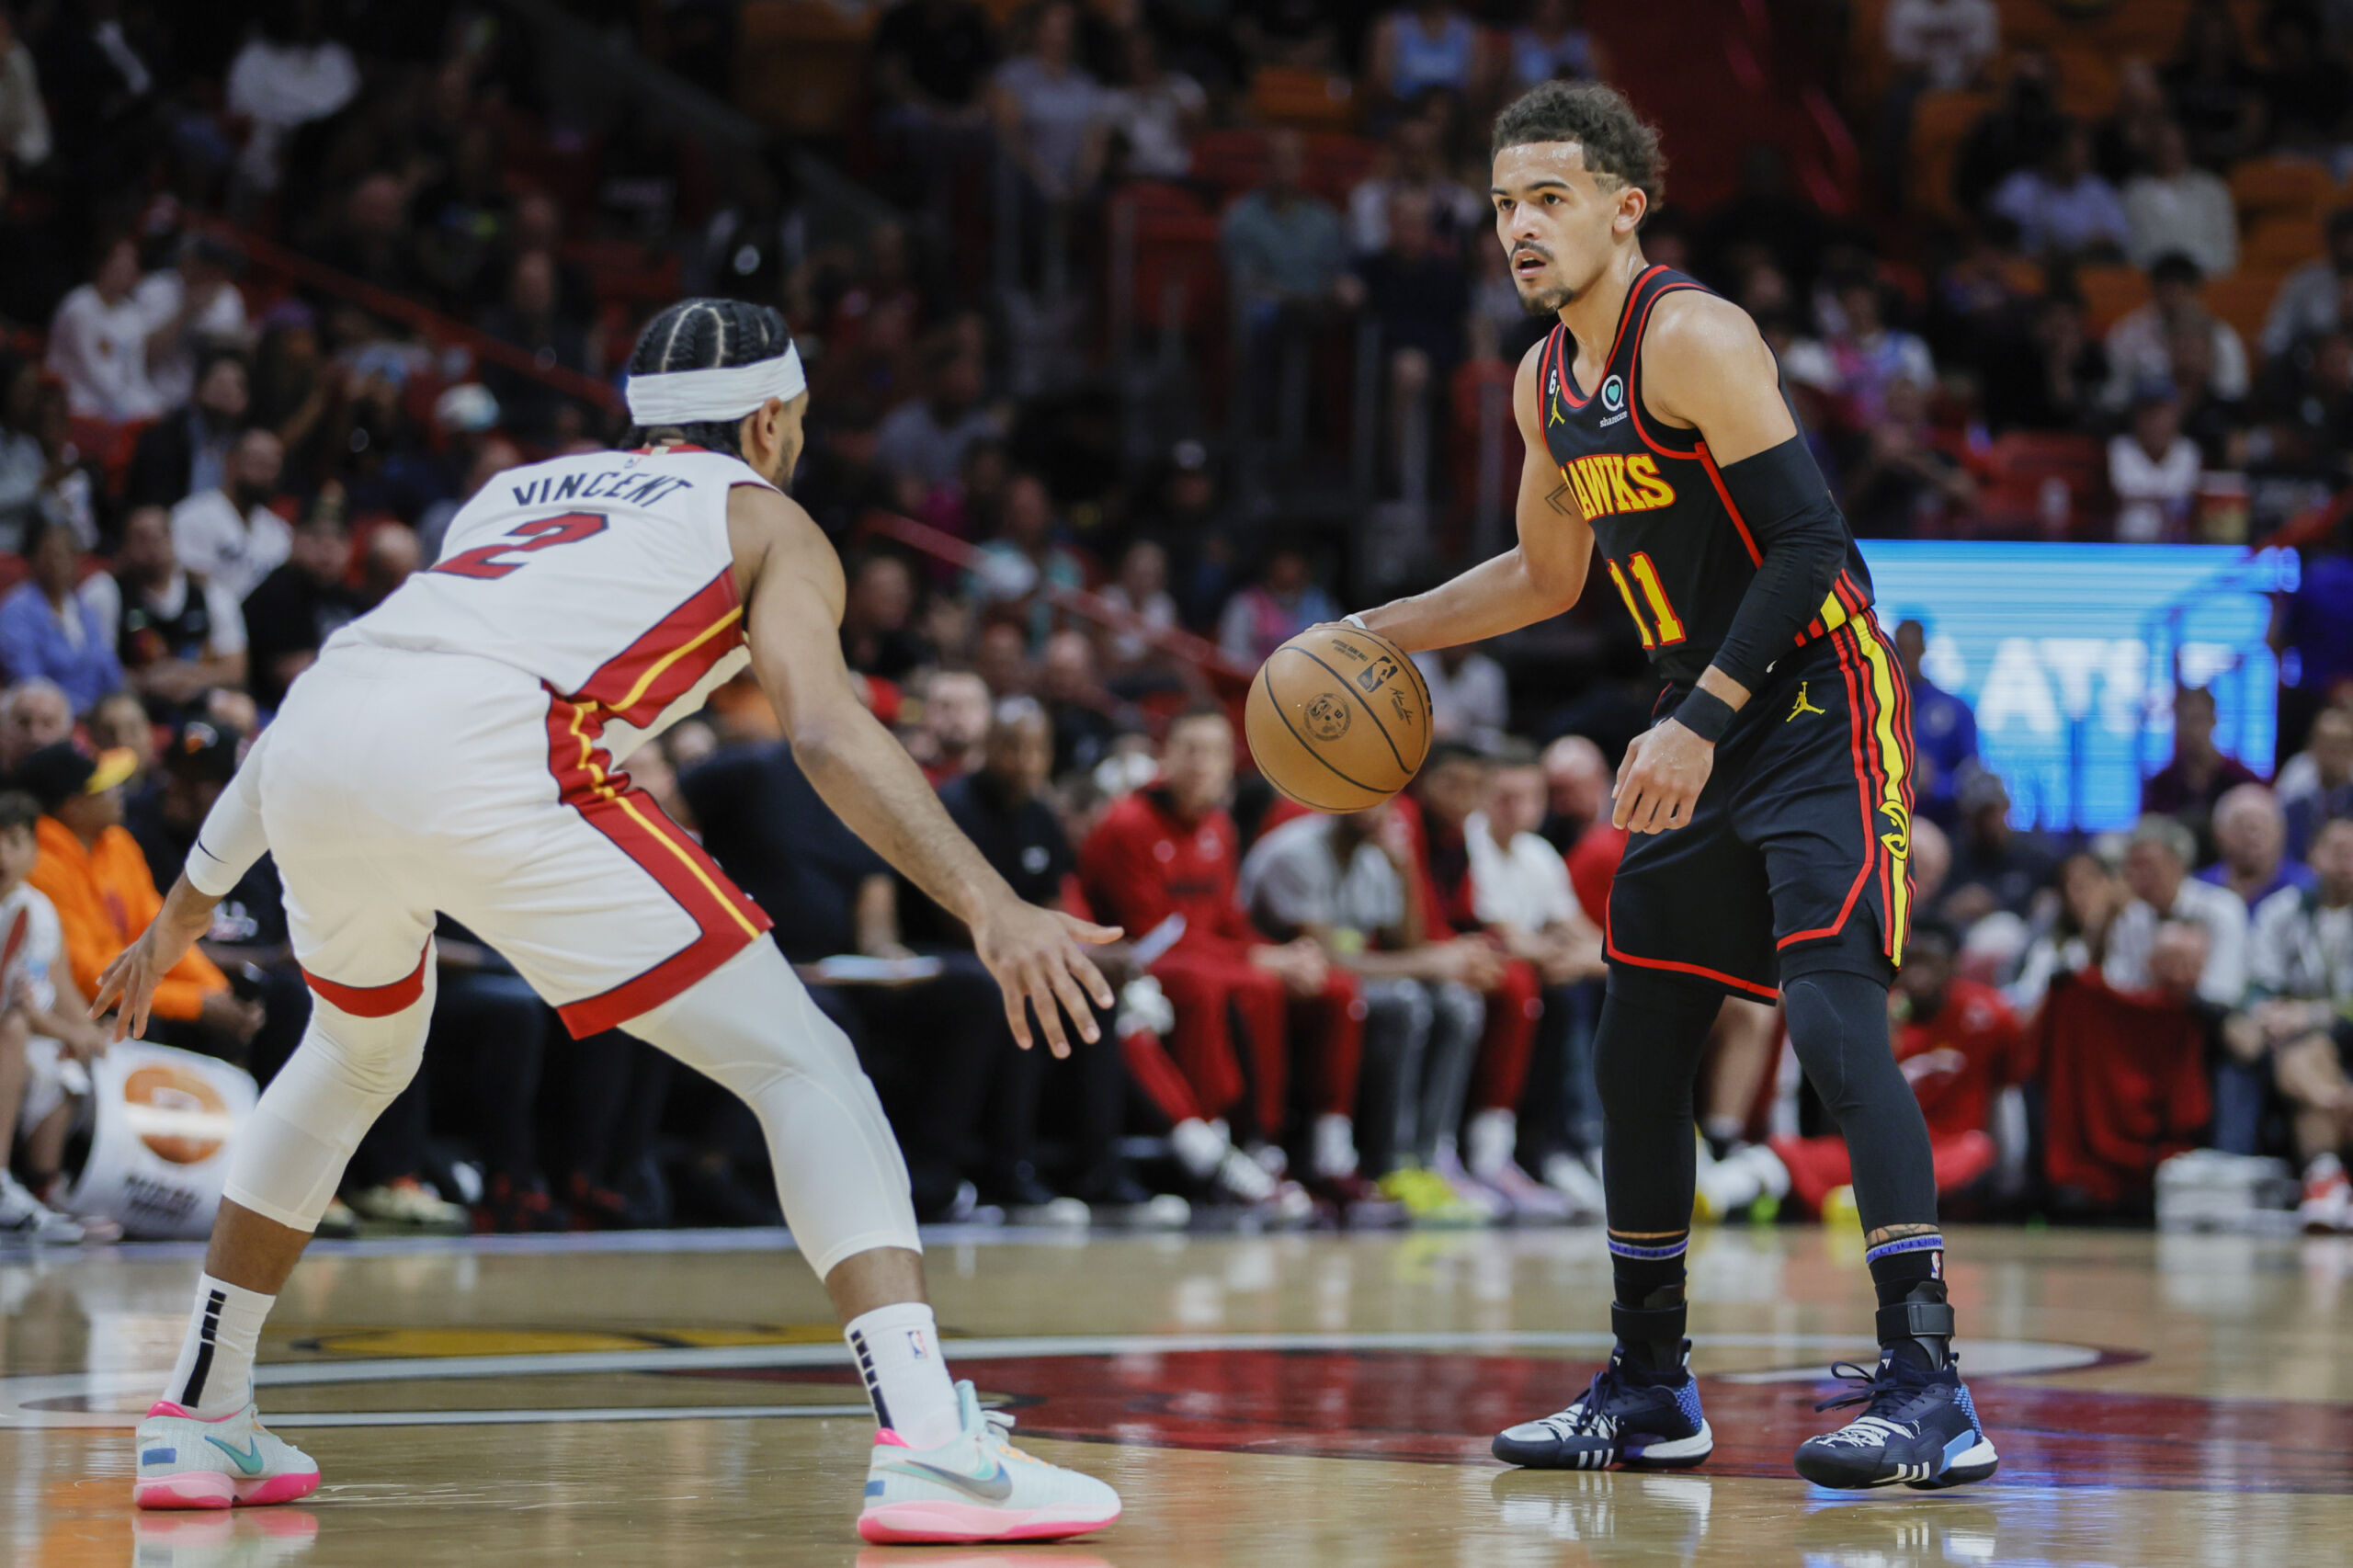 Hawks Trae Young sends message to Lakers Gabe Vincent